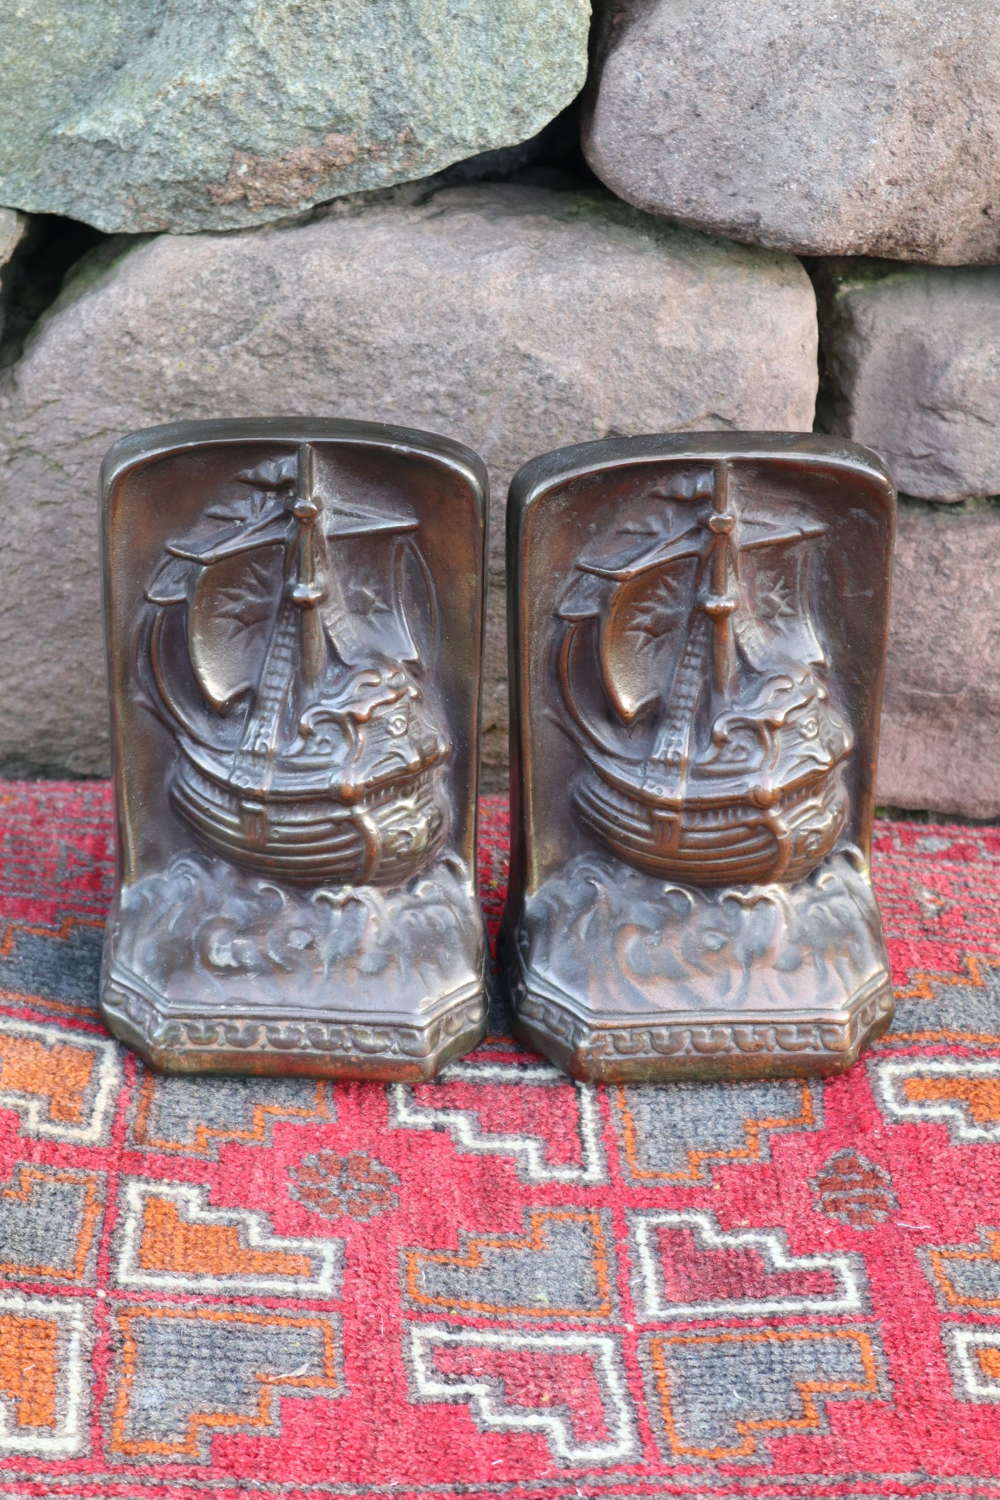 Arts & Crafts, galleons / sailing ships brass bookends c.1910.